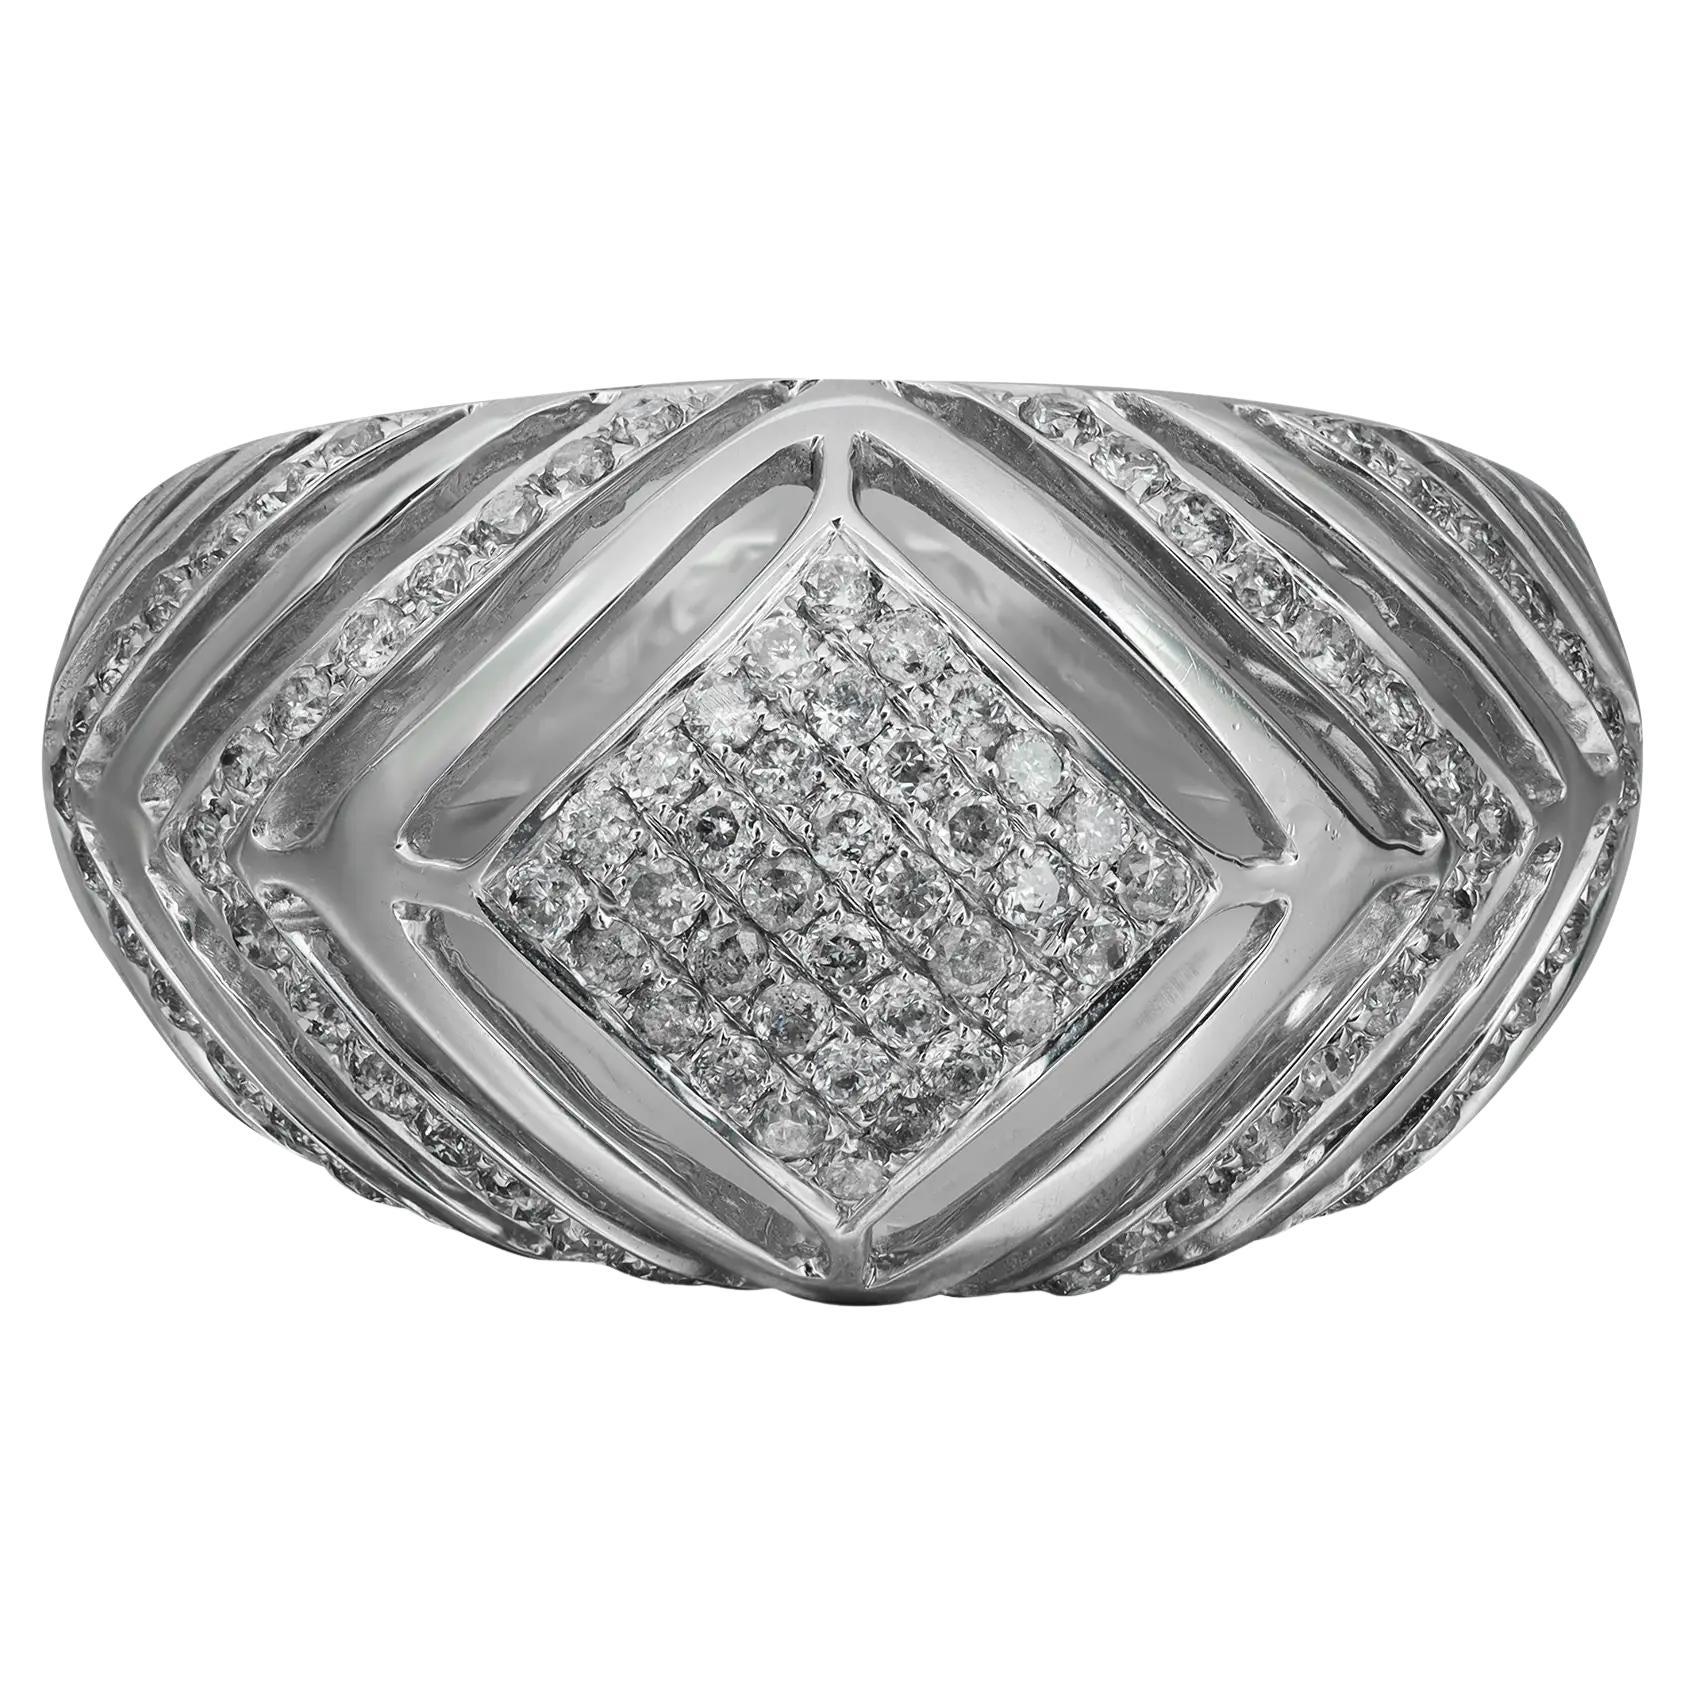 0.55Cttw Pave Set Round Cut Diamond Ladies Cocktail Ring 14K White Gold Size 7.5 For Sale